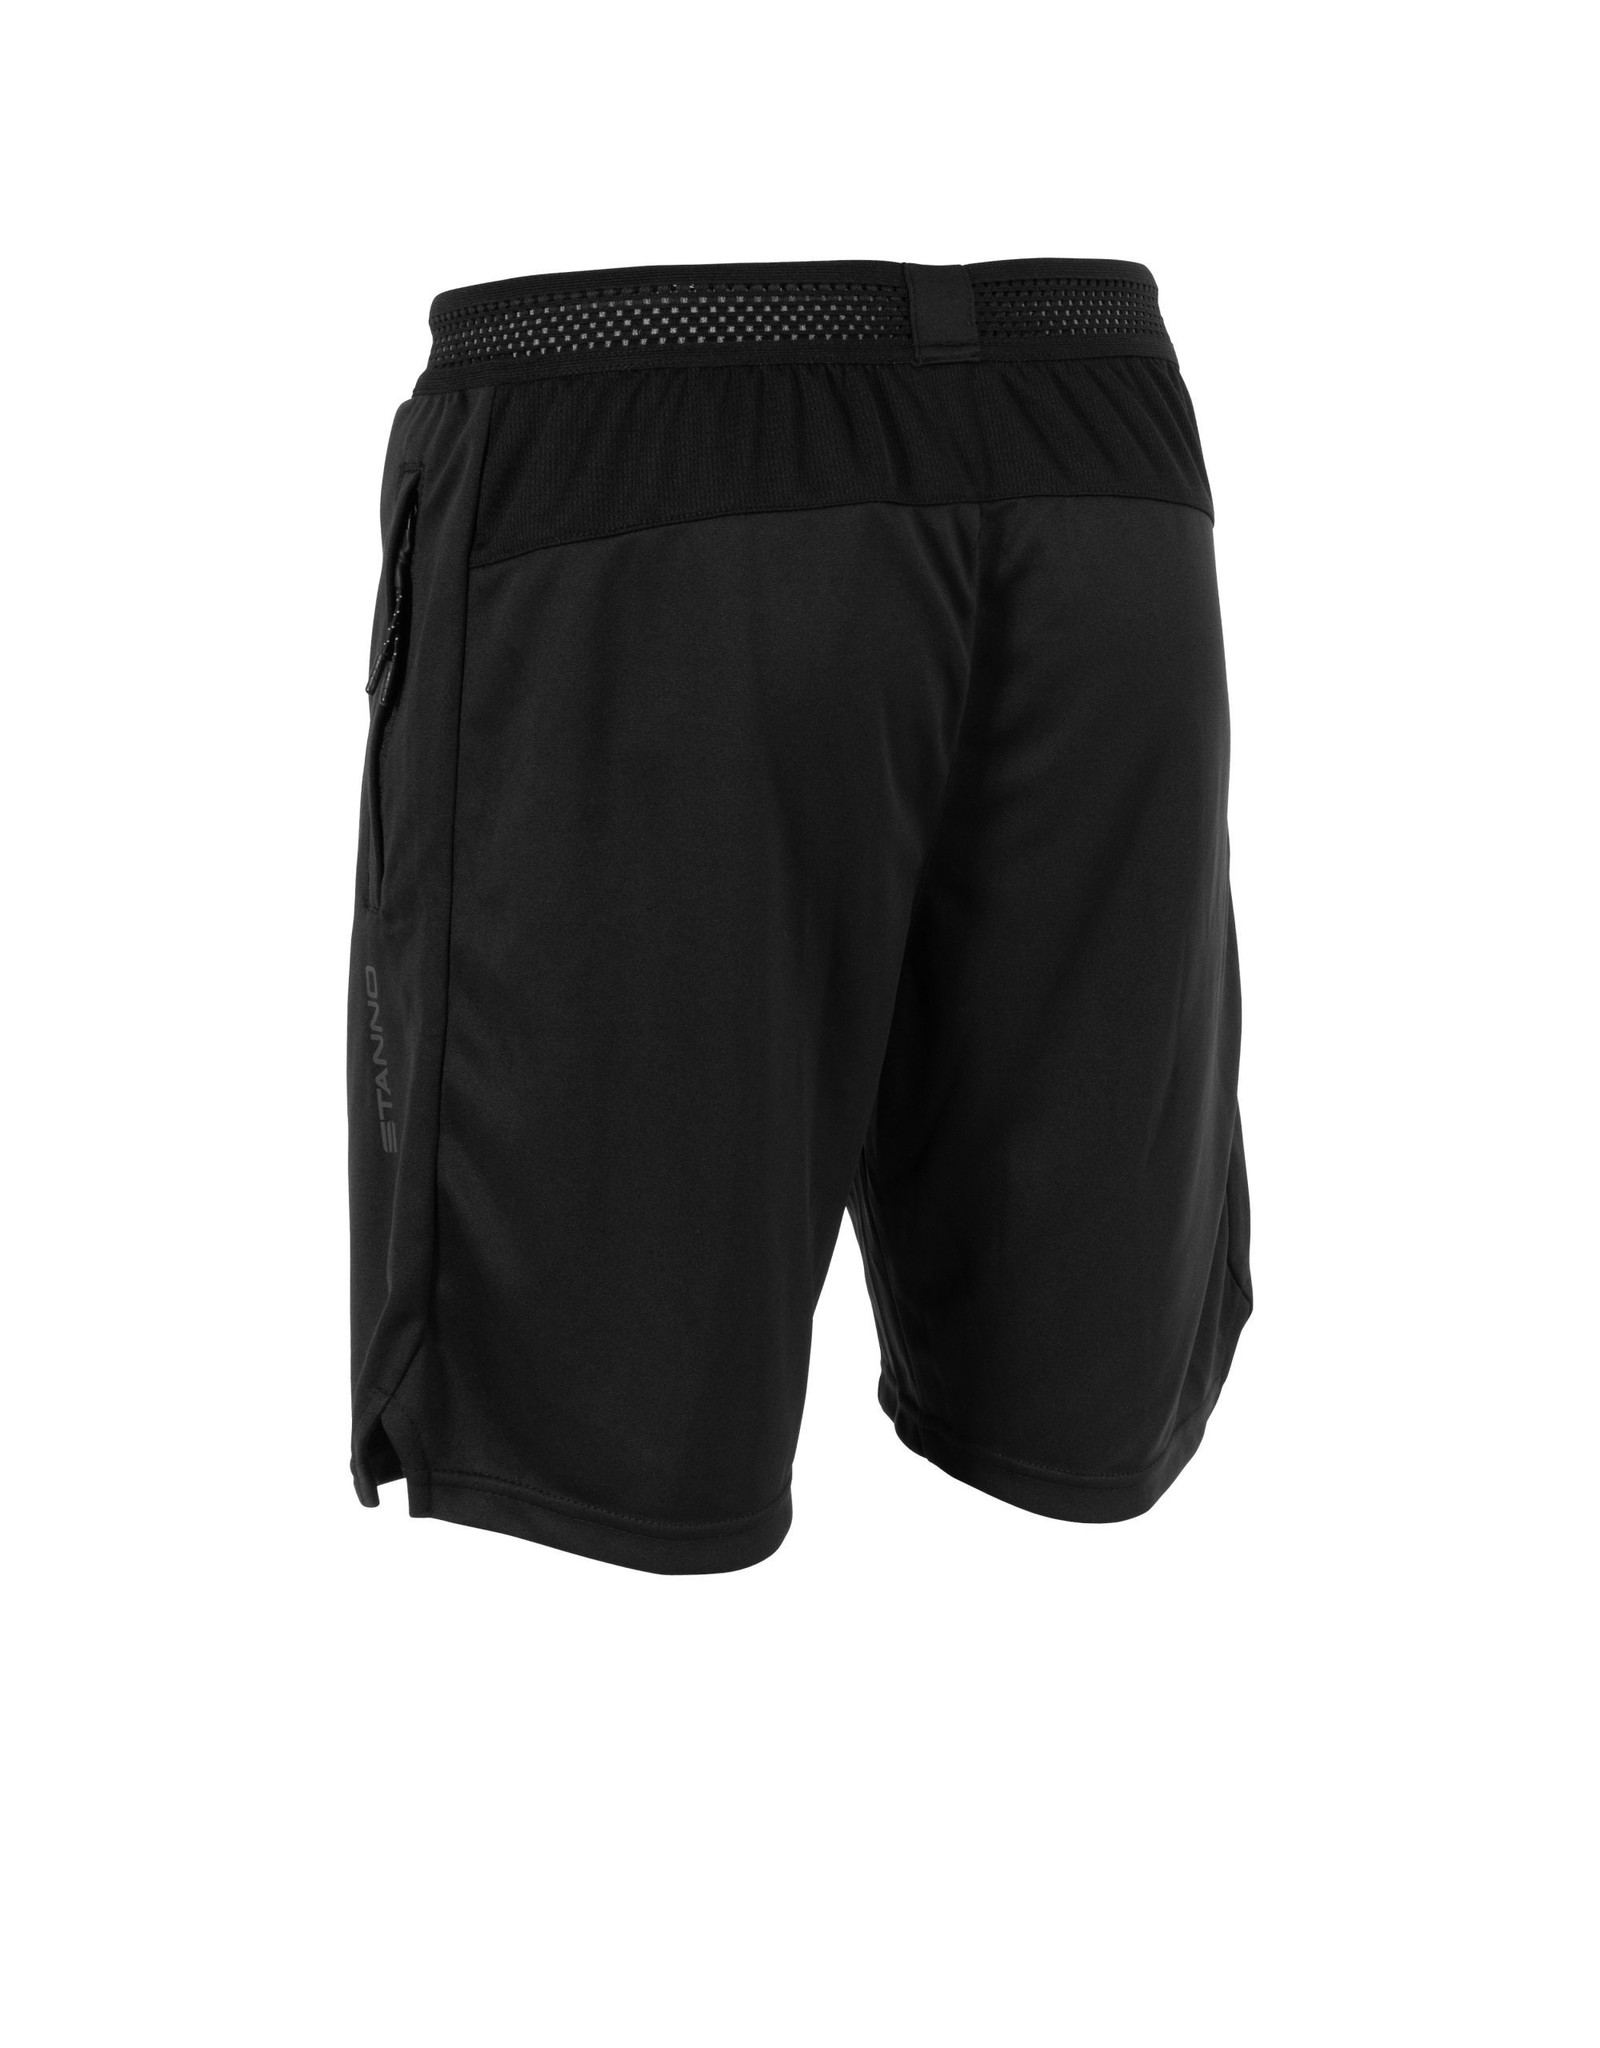 Stanno Functionals Shorts II-Black